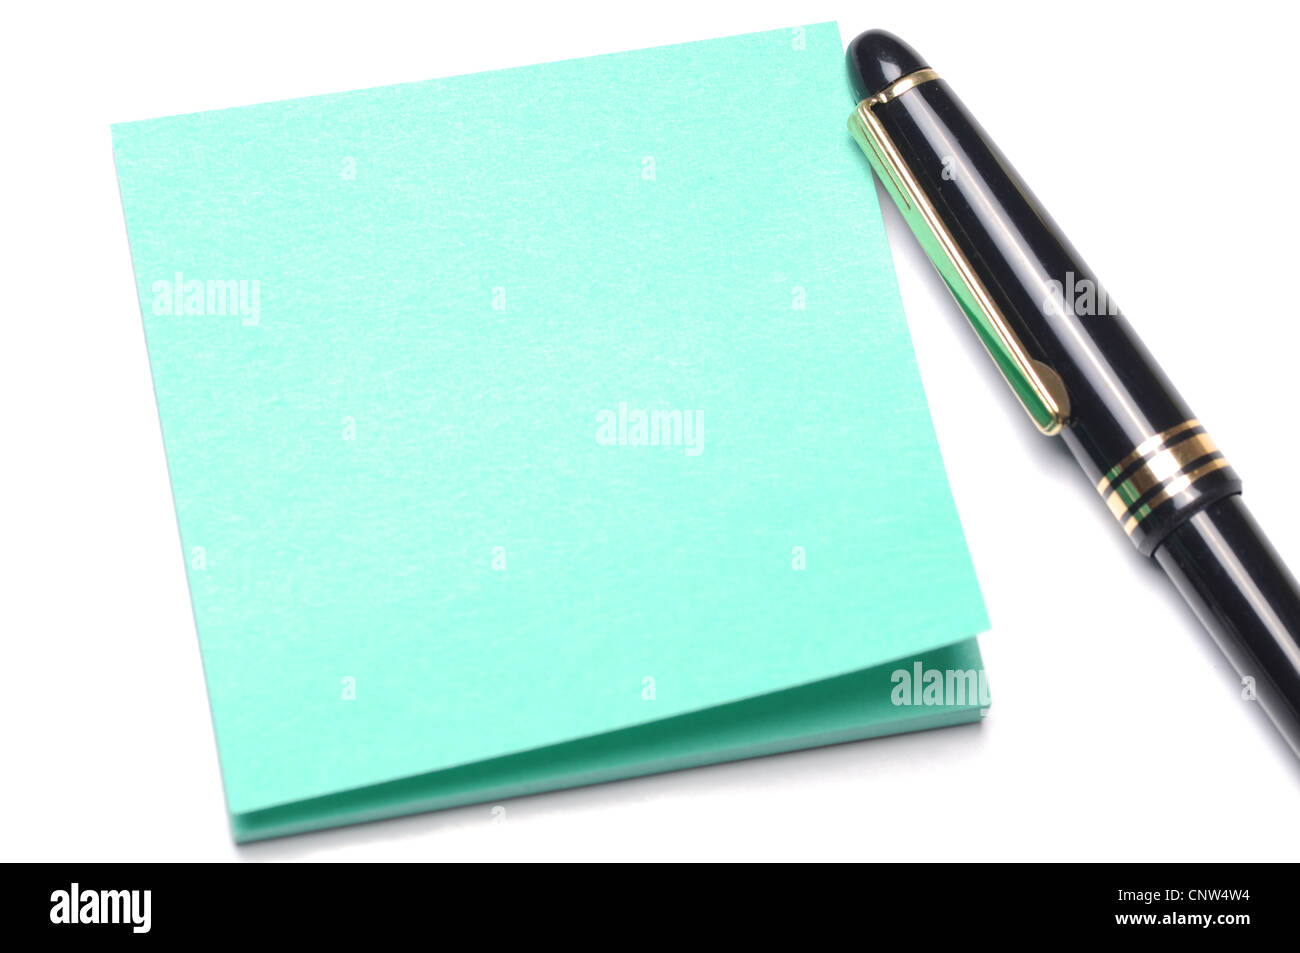 Light green adhesive note and pen Stock Photo